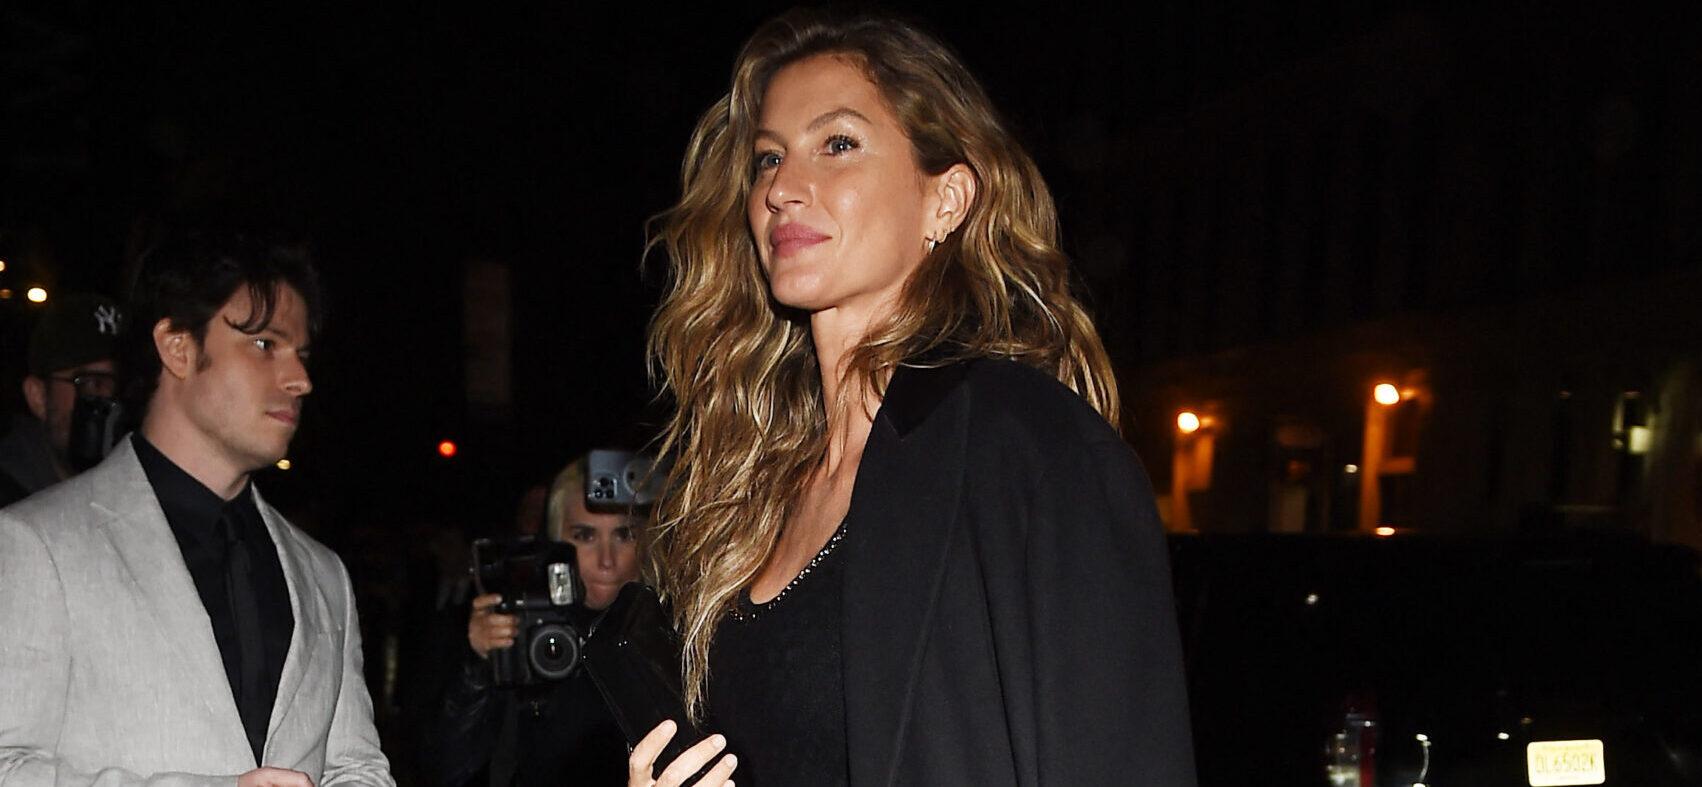 Gisele Bundchen seen leaving the Met Gala after party at the Zero Bond